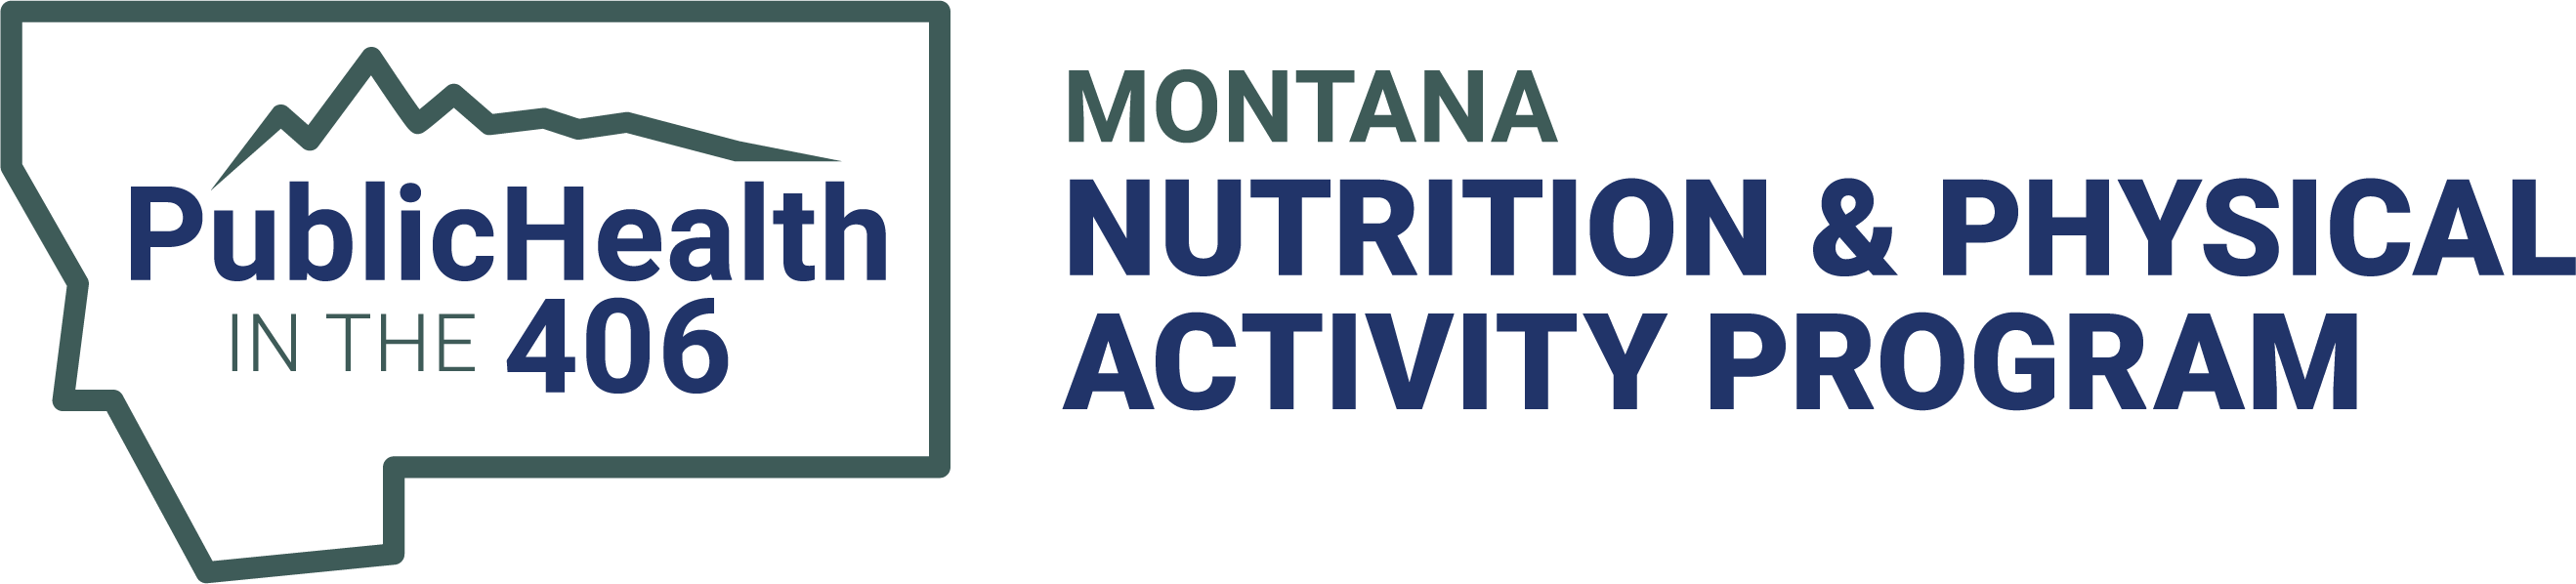 Nutrition and Physical Activity Program